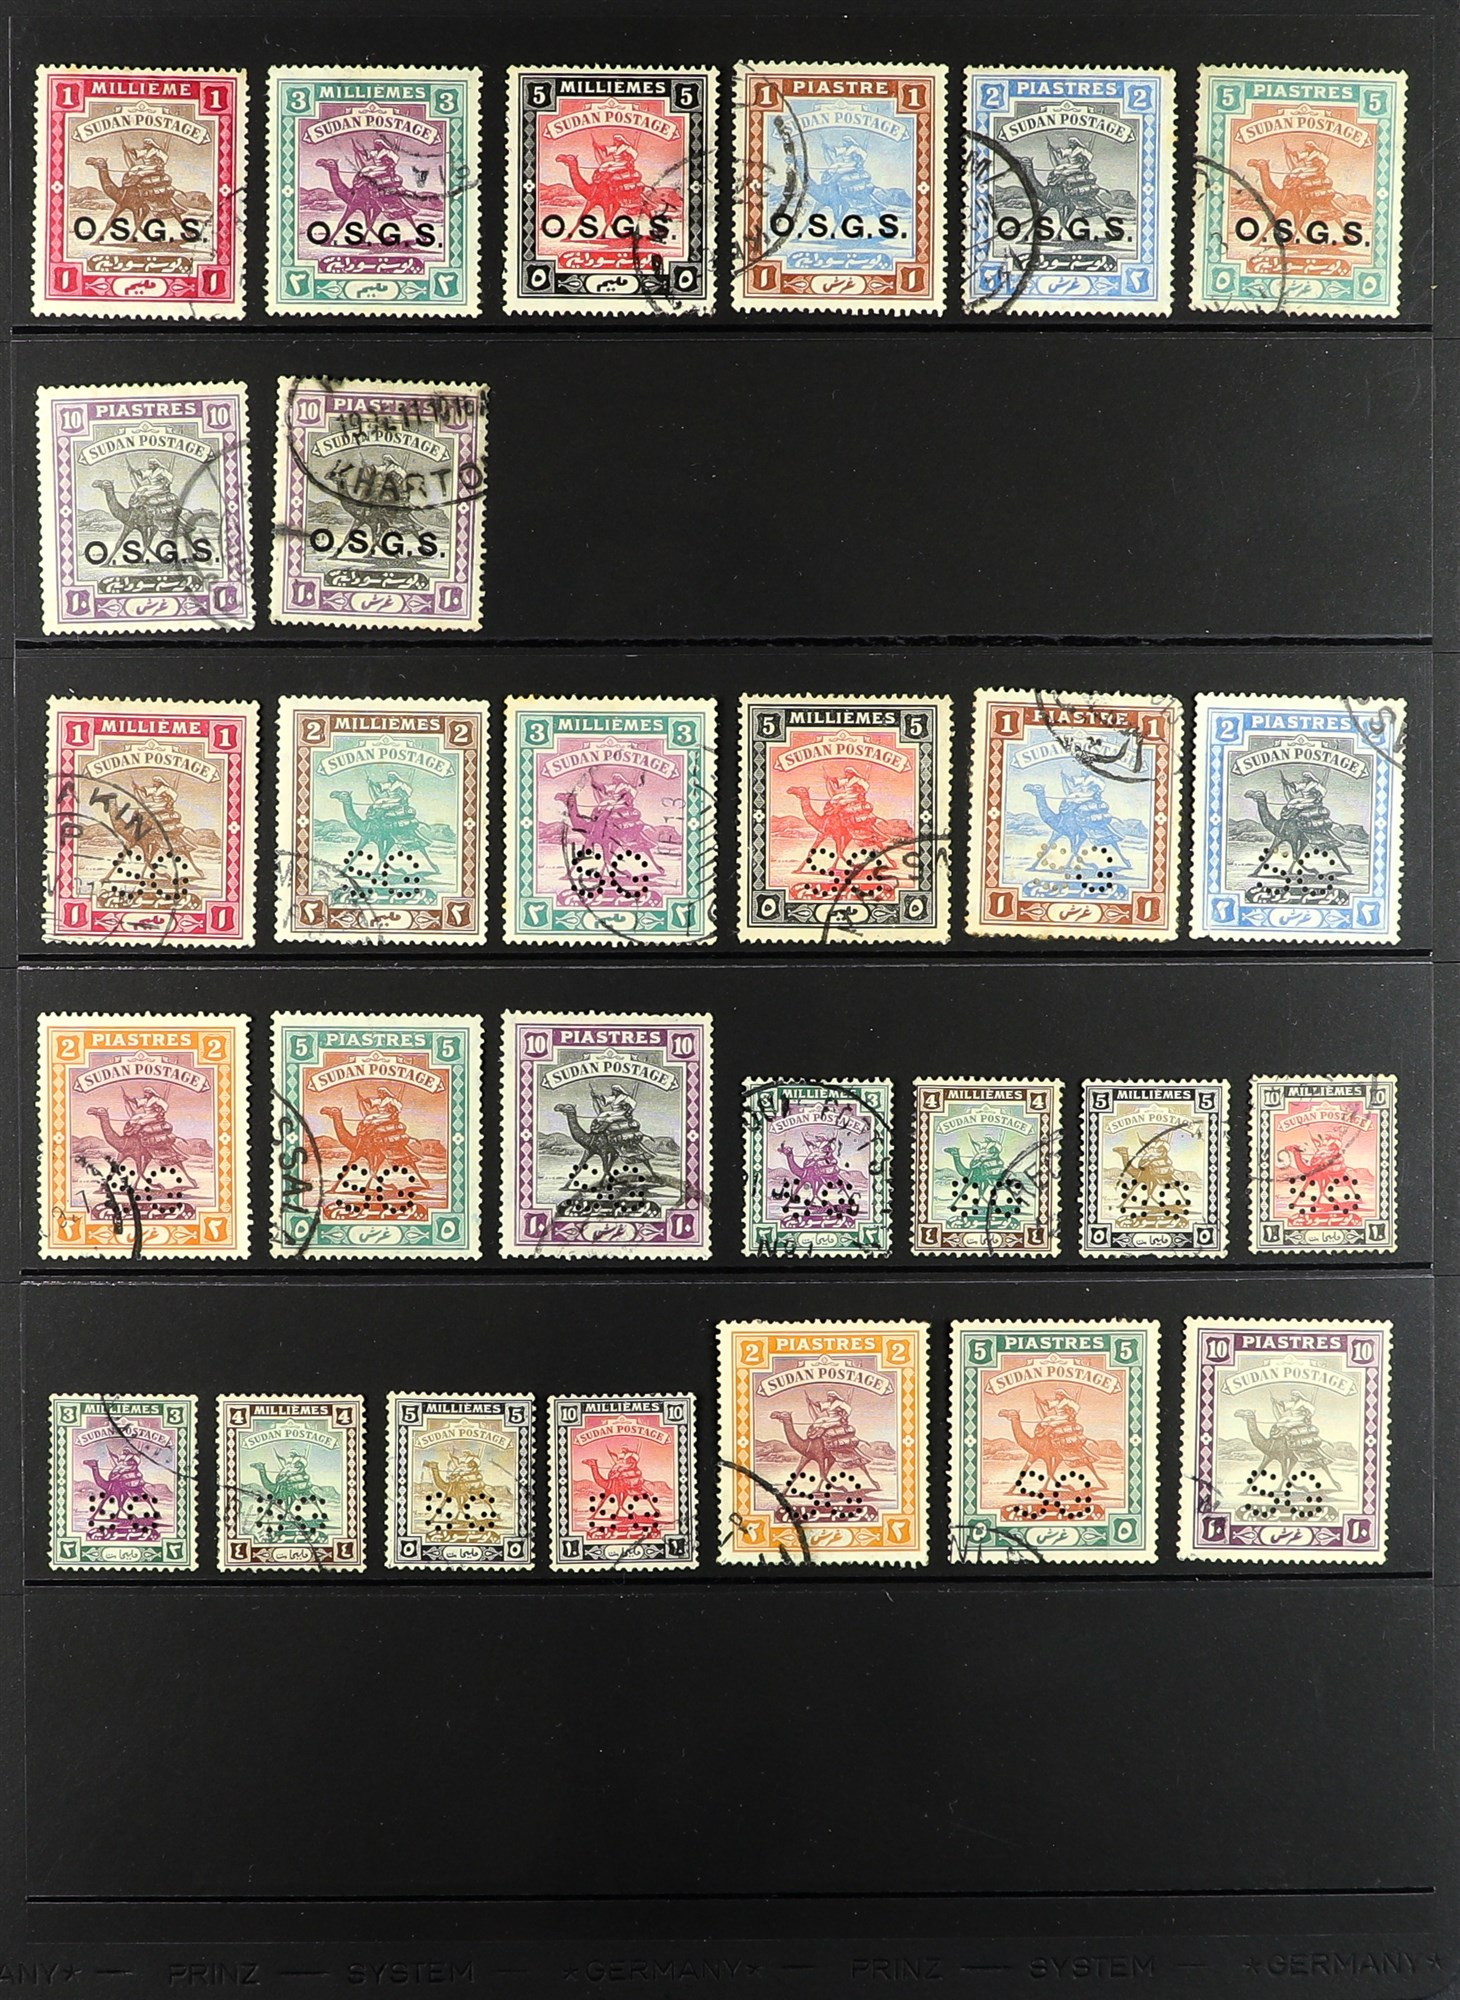 SUDAN 1897 - 1961 FINE USED COLLECTION of 150+ stamps on protective pages, includes the 1897, - Image 6 of 6